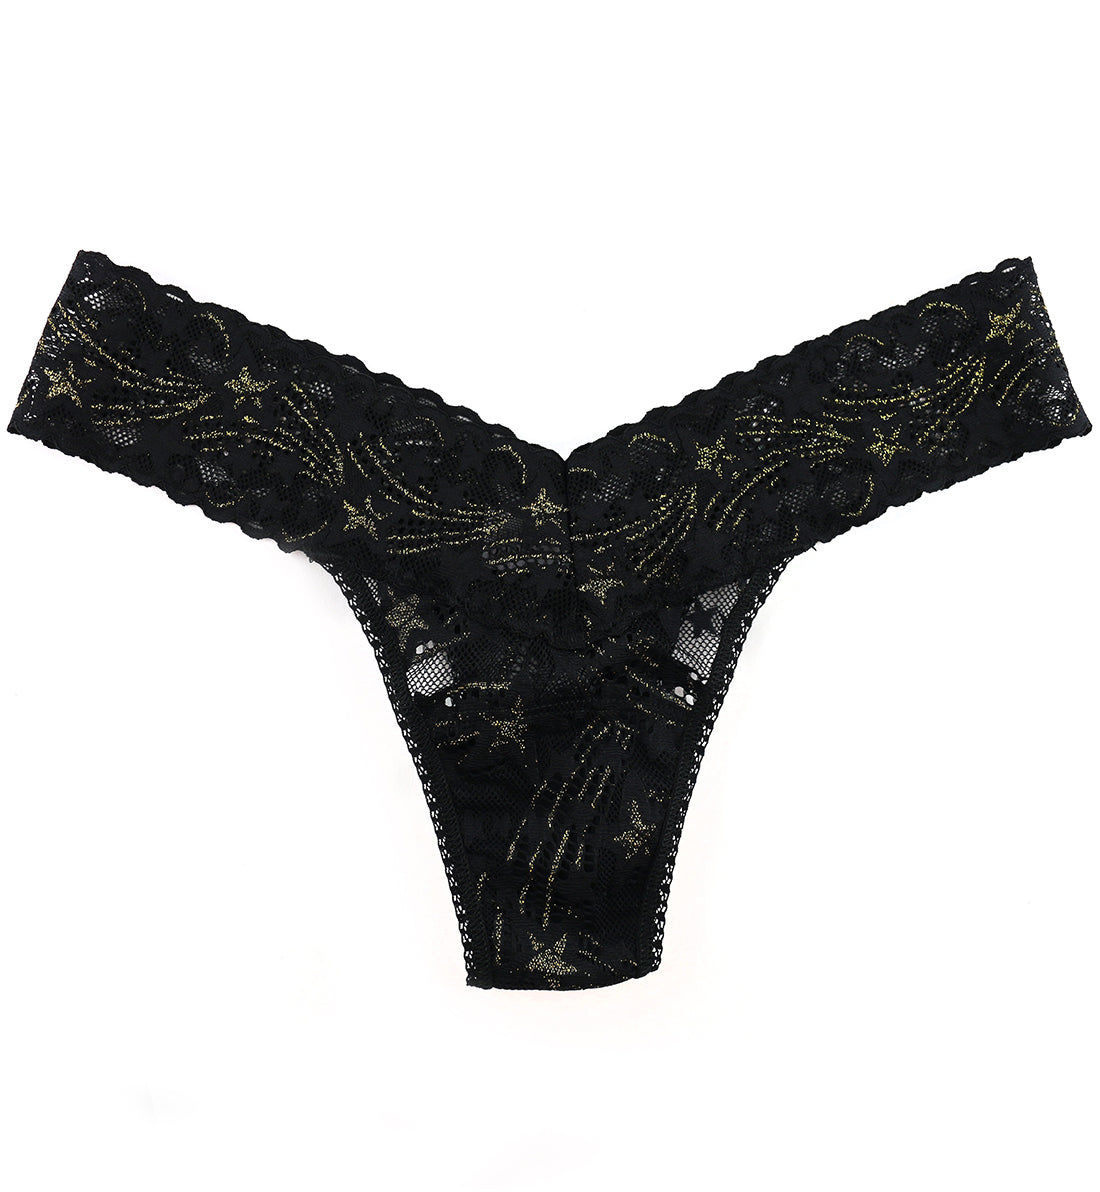 Hanky Panky Night Fever Low Rise Thong (151586),Black/Gold - Black/Gold,One Size